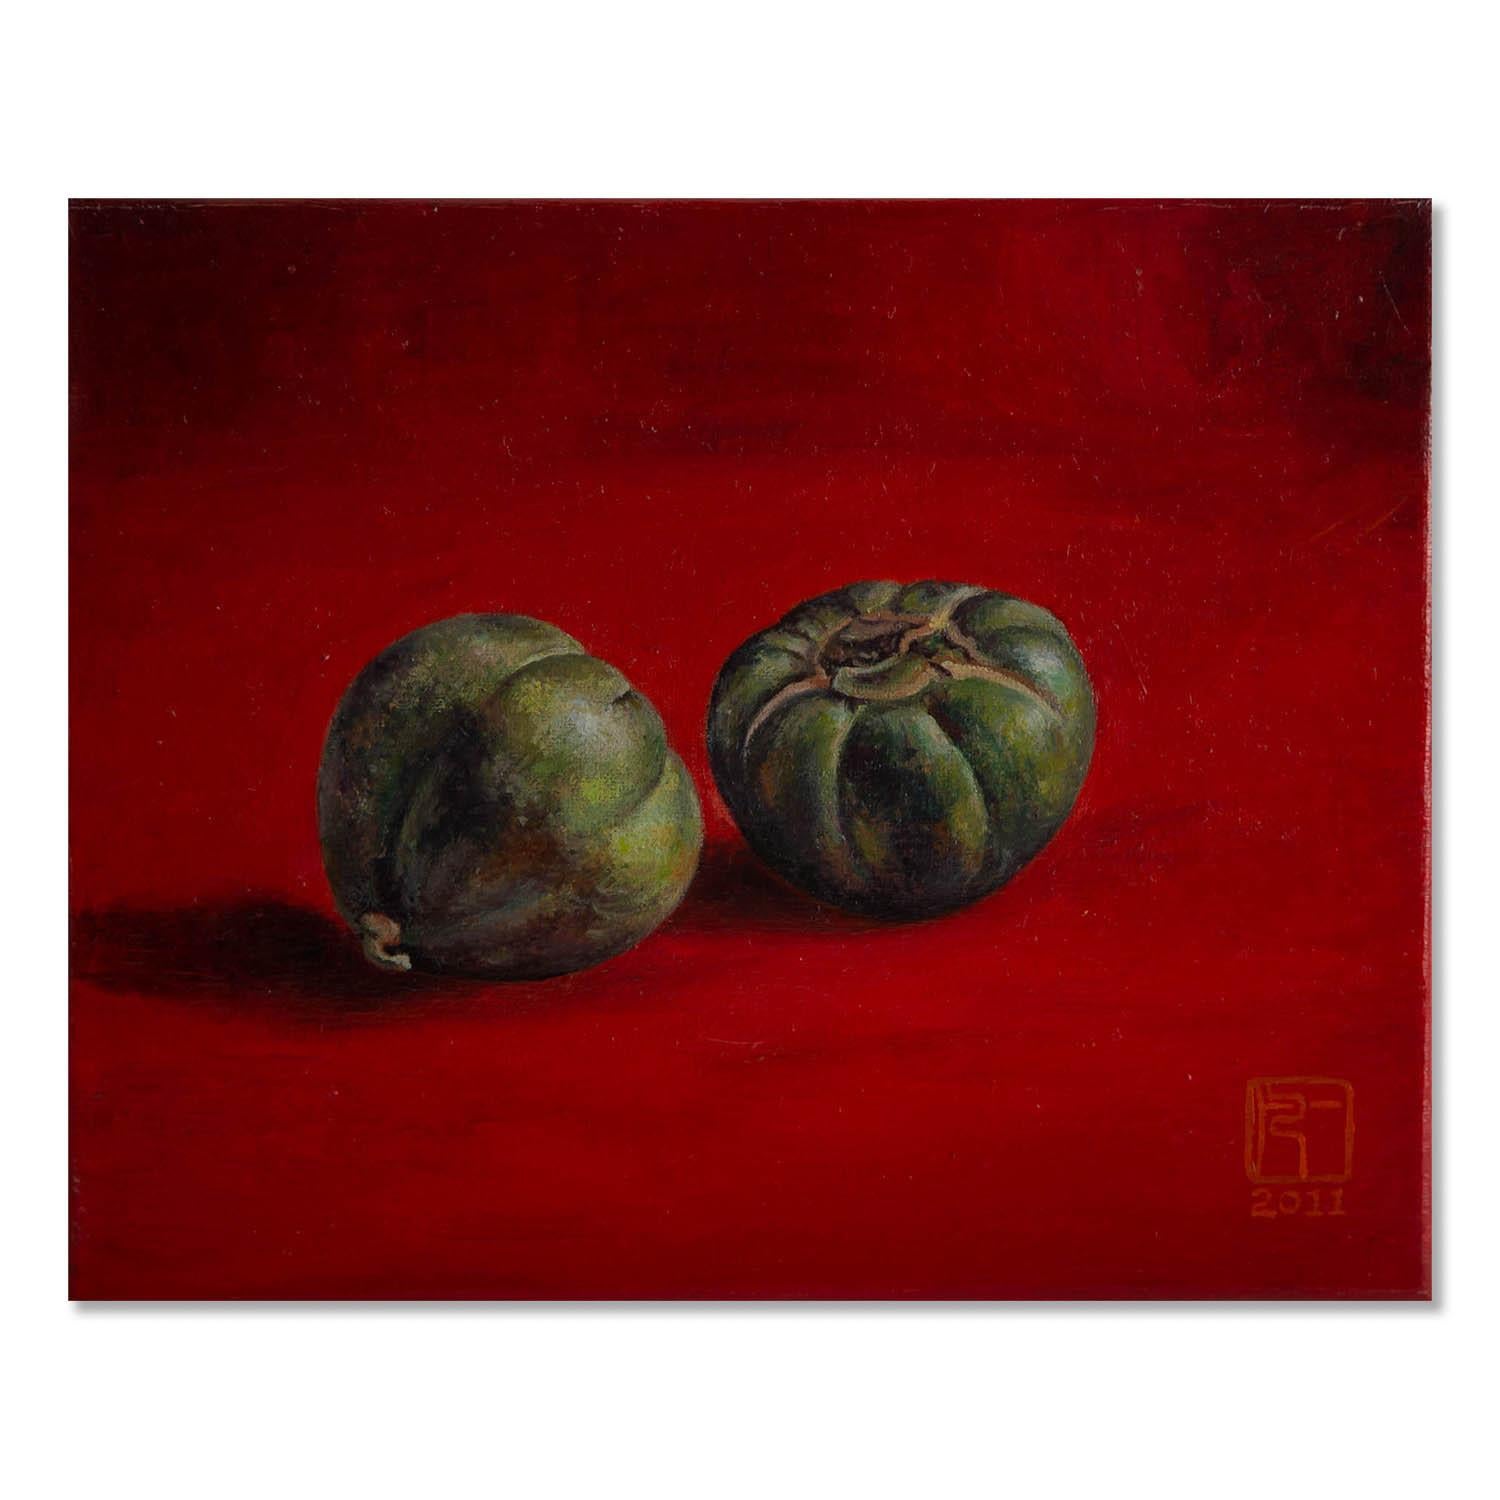  Title: Little Pumpkin
 Medium: Oil on canvas
 Size: 8.5 x 10.5 inches
 Frame: Framing options available!
 Condition: The painting appears to be in excellent condition.
 
 Year: 2011
 Artist: Yifan Liu
 Signature: Signed
 Signature Location: Lower